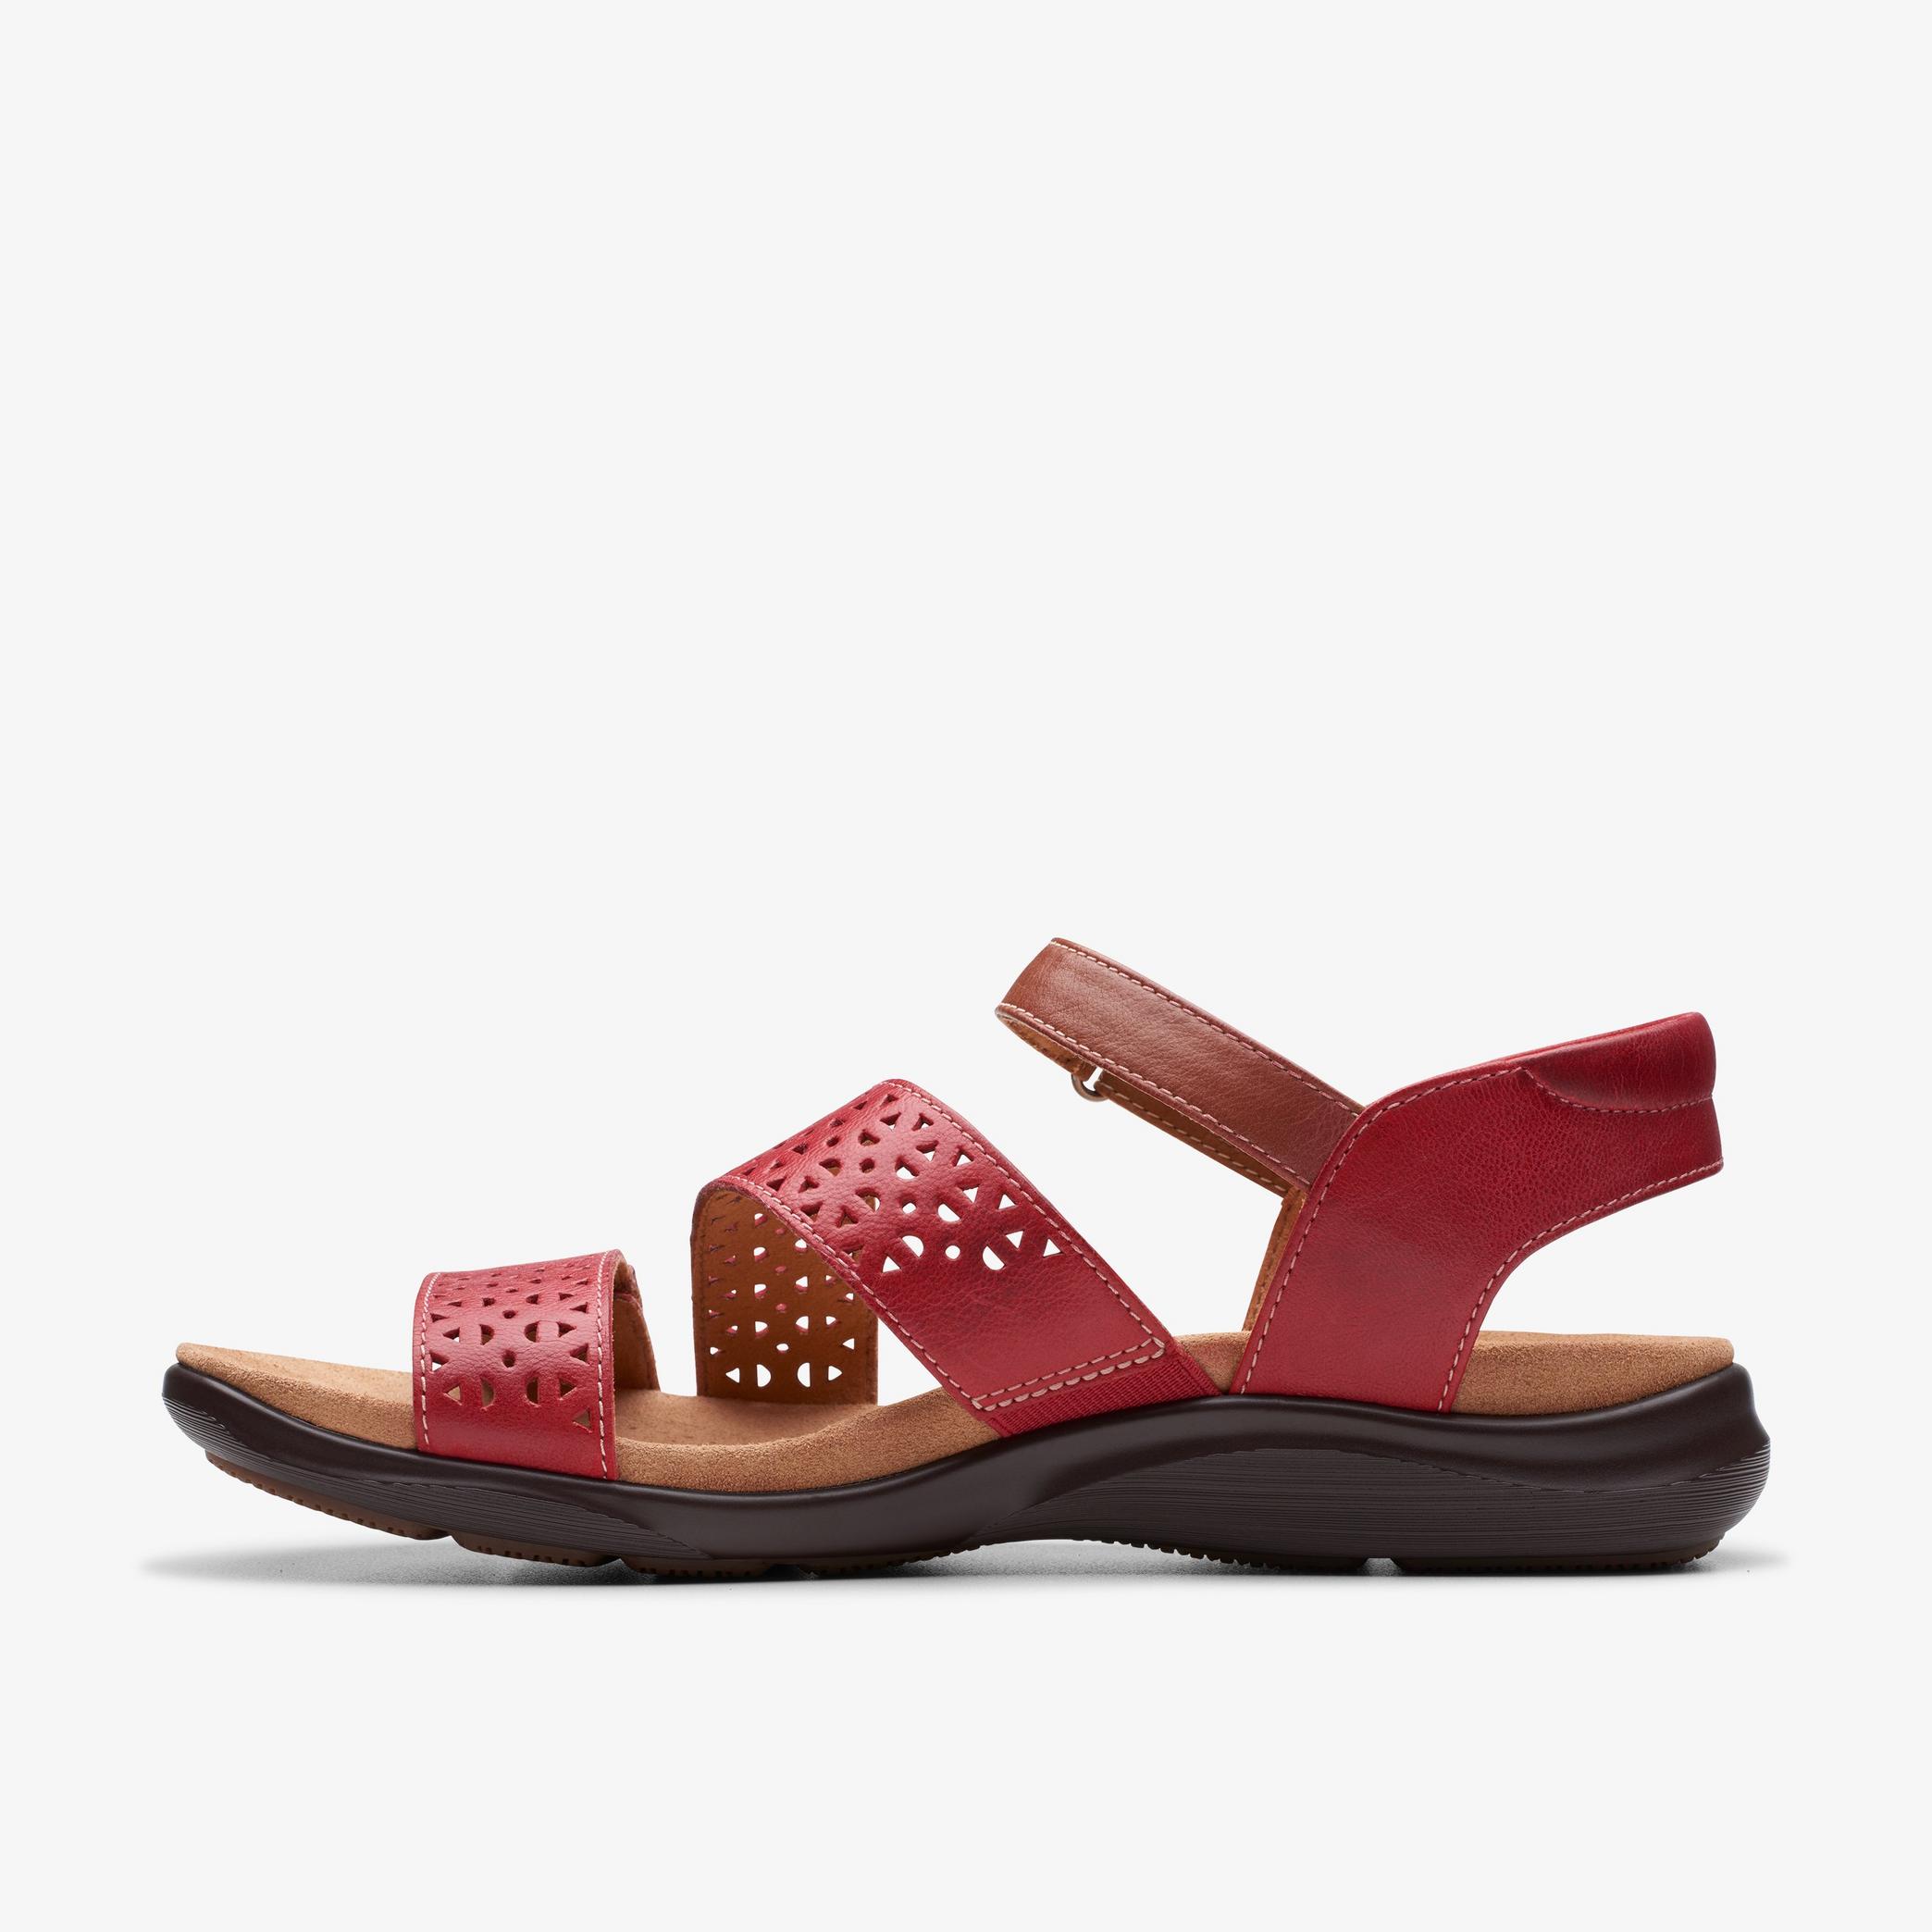 Kitly Way Cherry Leather Flat Sandals, view 2 of 6